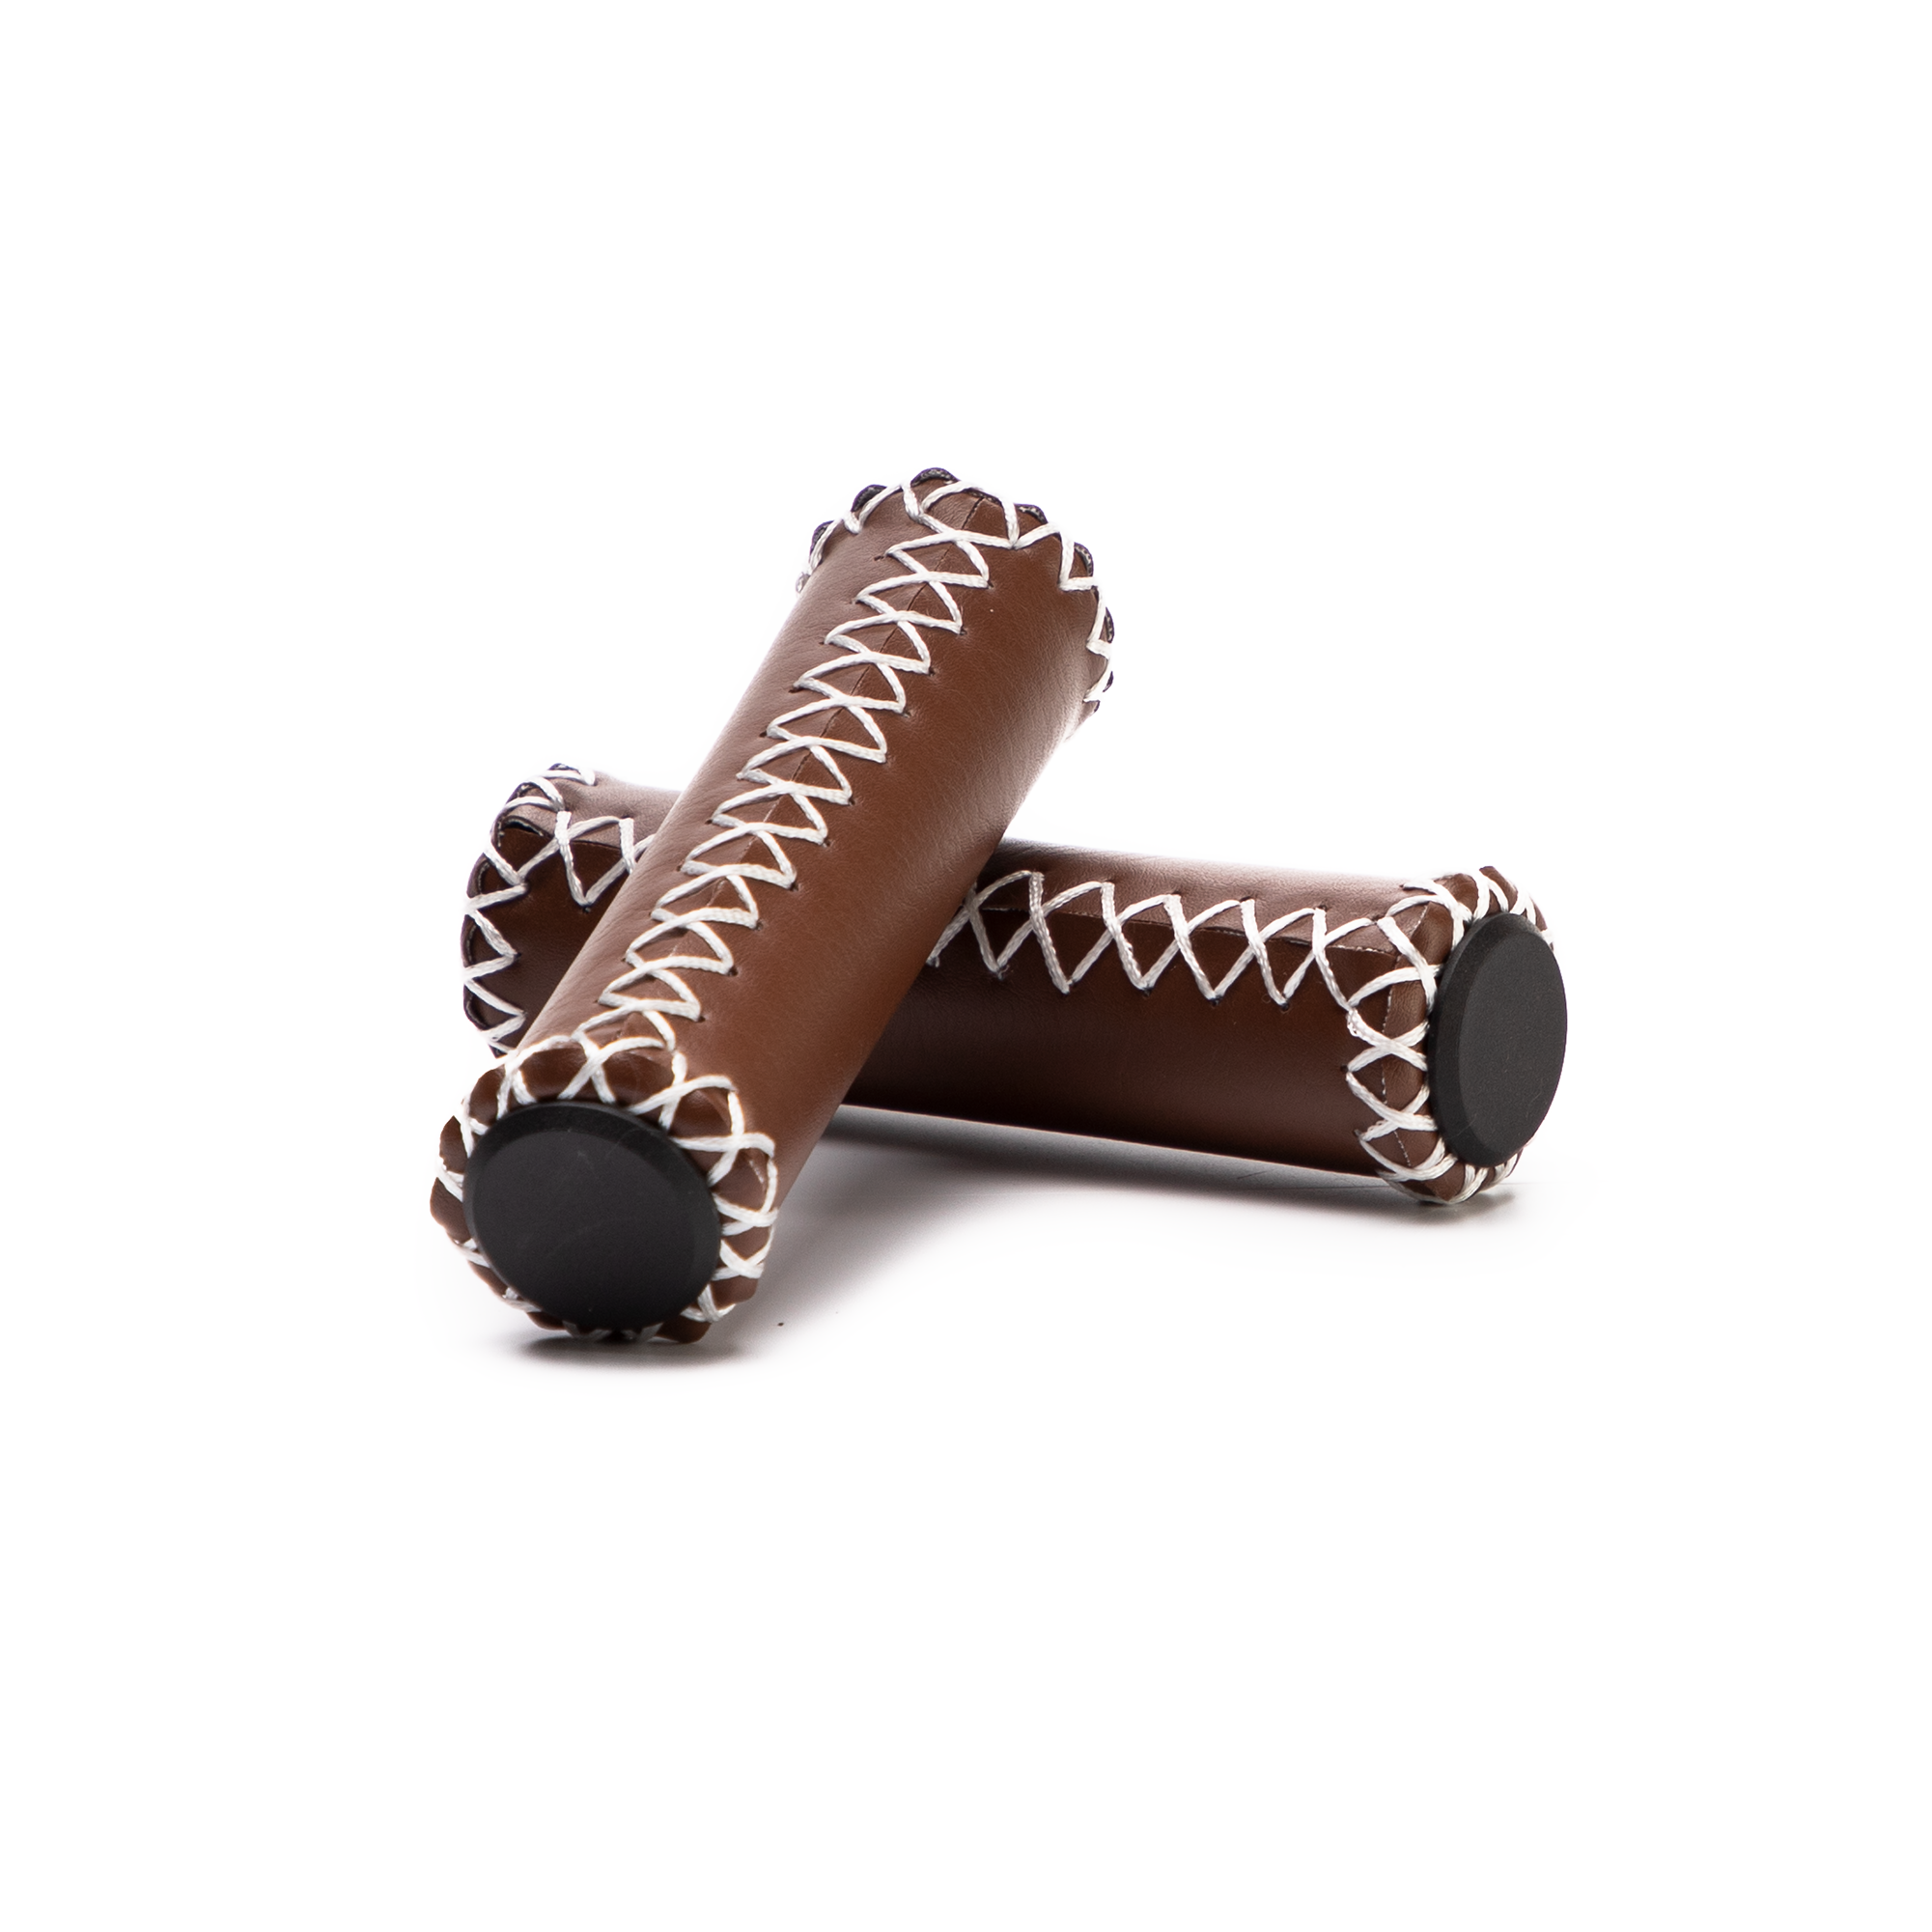 Leather-Look Honey-Colored Grips (Set of 2)